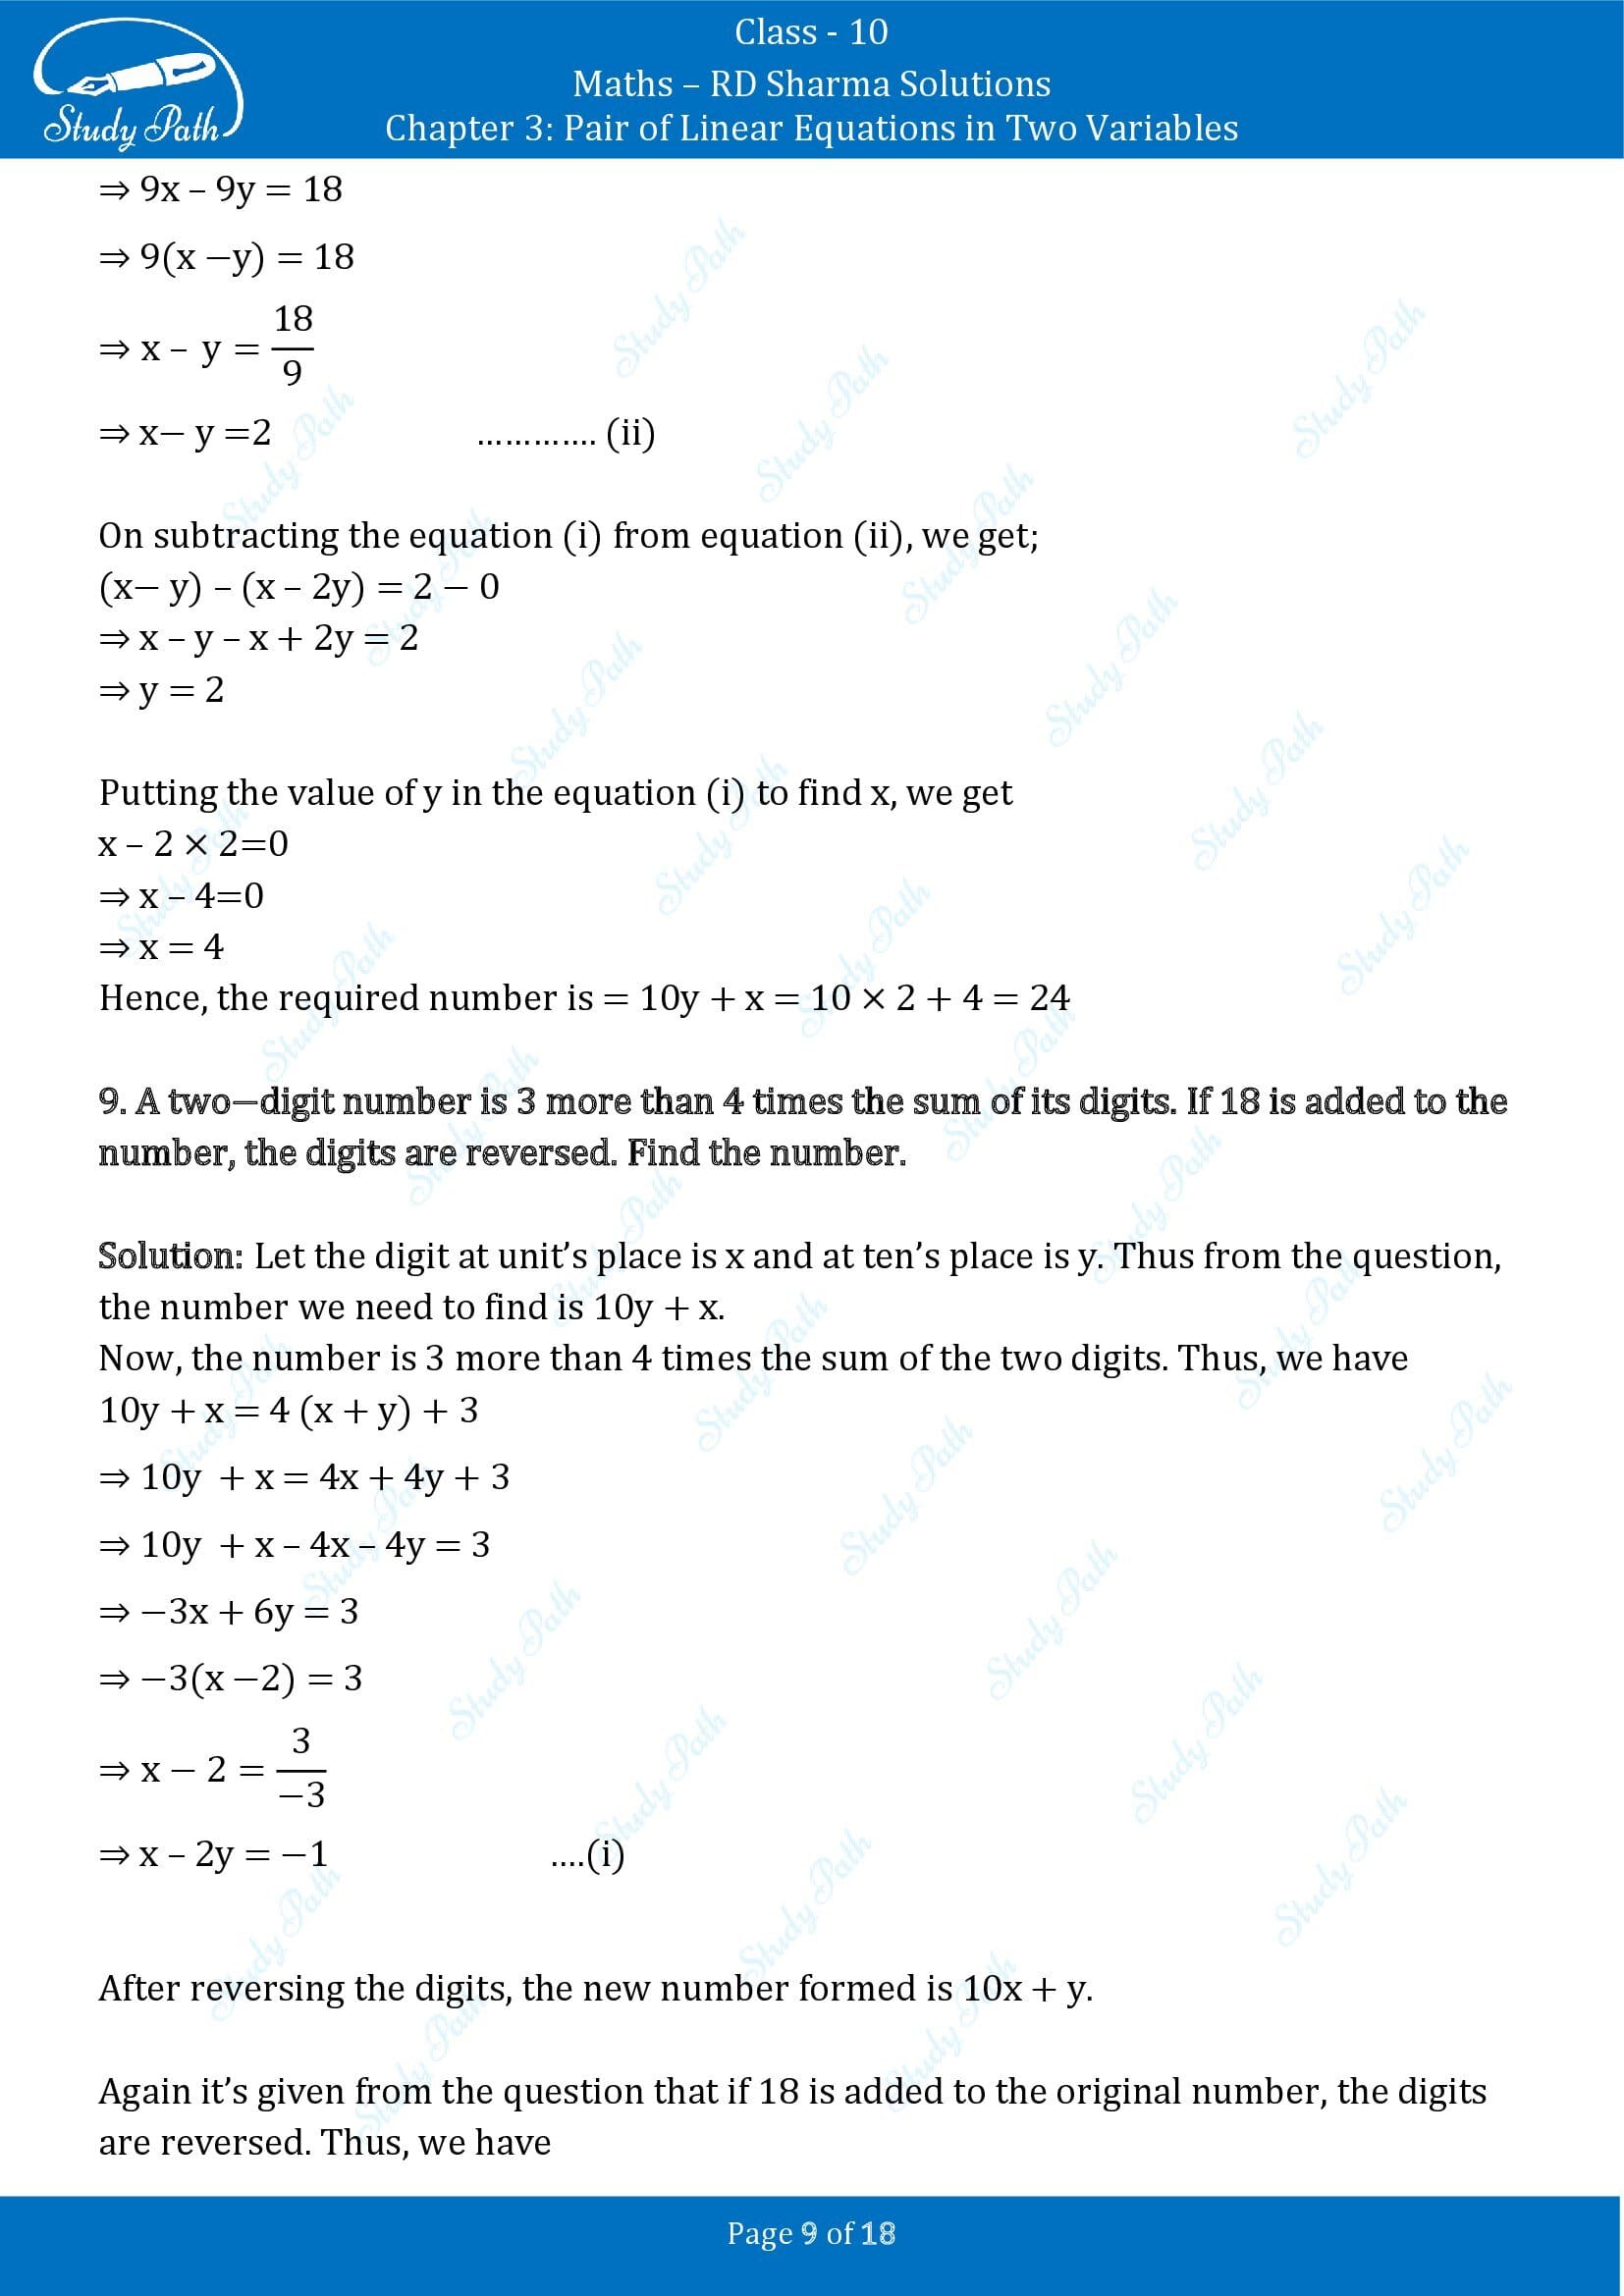 RD Sharma Solutions Class 10 Chapter 3 Pair of Linear Equations in Two Variables Exercise 3.7 00009